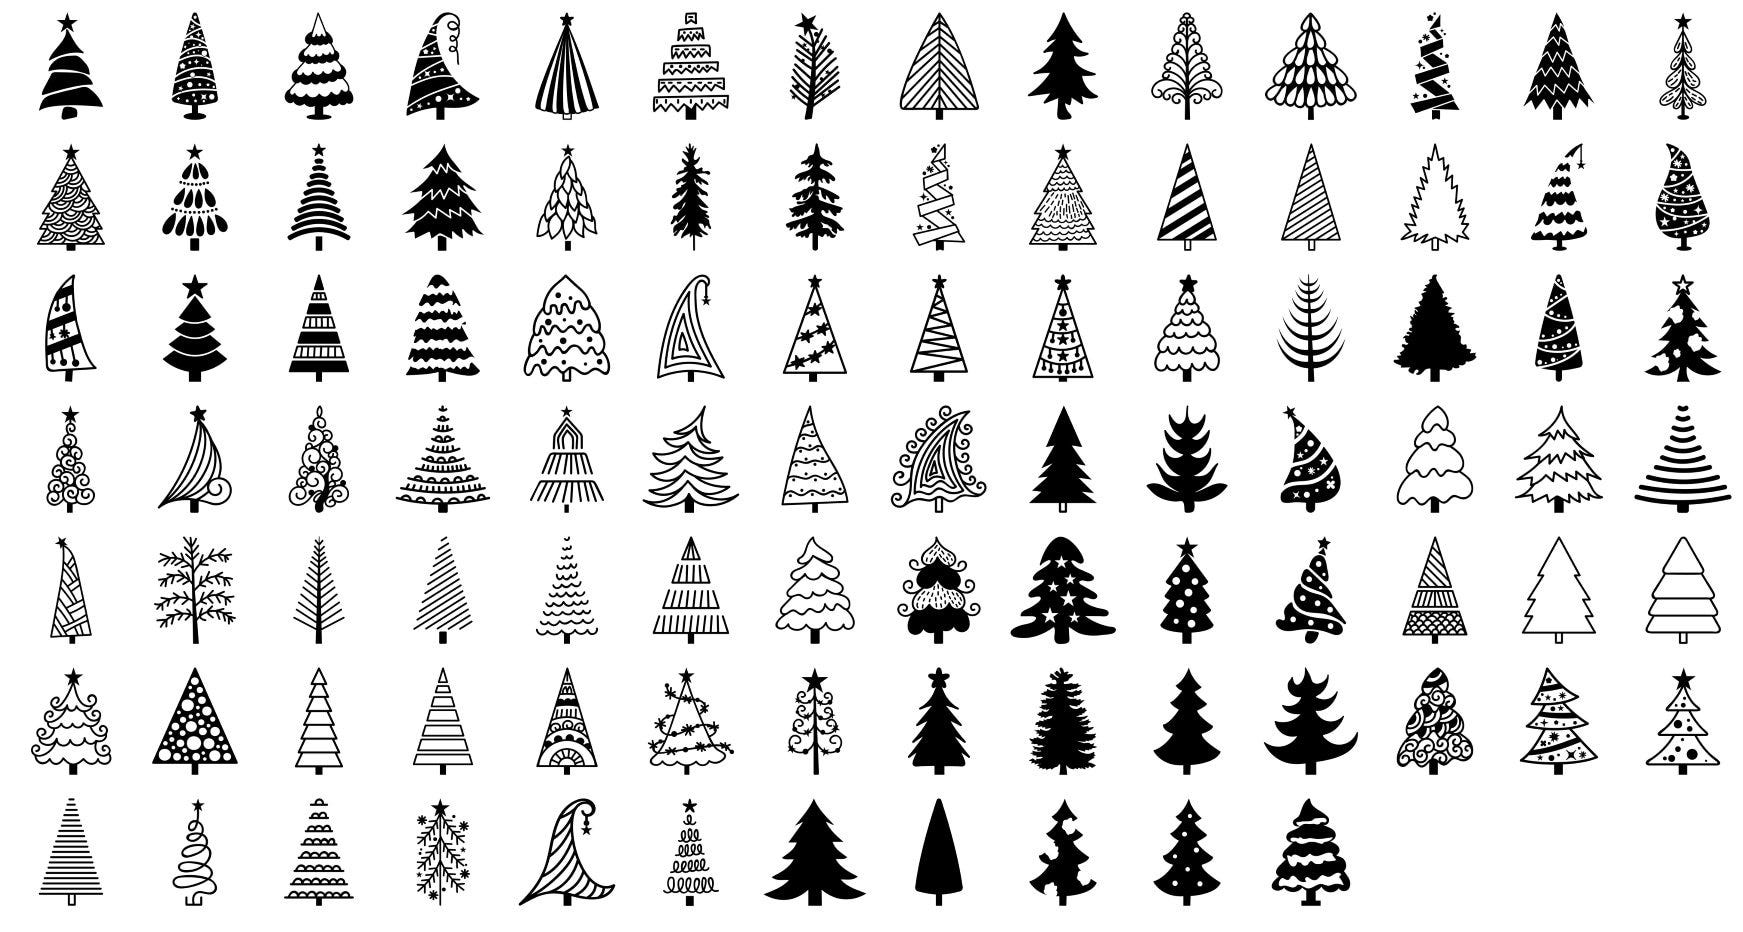 Tree SVG Bundle, Tree PNG Bundle, Tree Clipart, Tree Cut Files Cricut, Tree silhouette, Forest svg, Christmas Tree, Svg, Eps, Ai, Dxf, Png